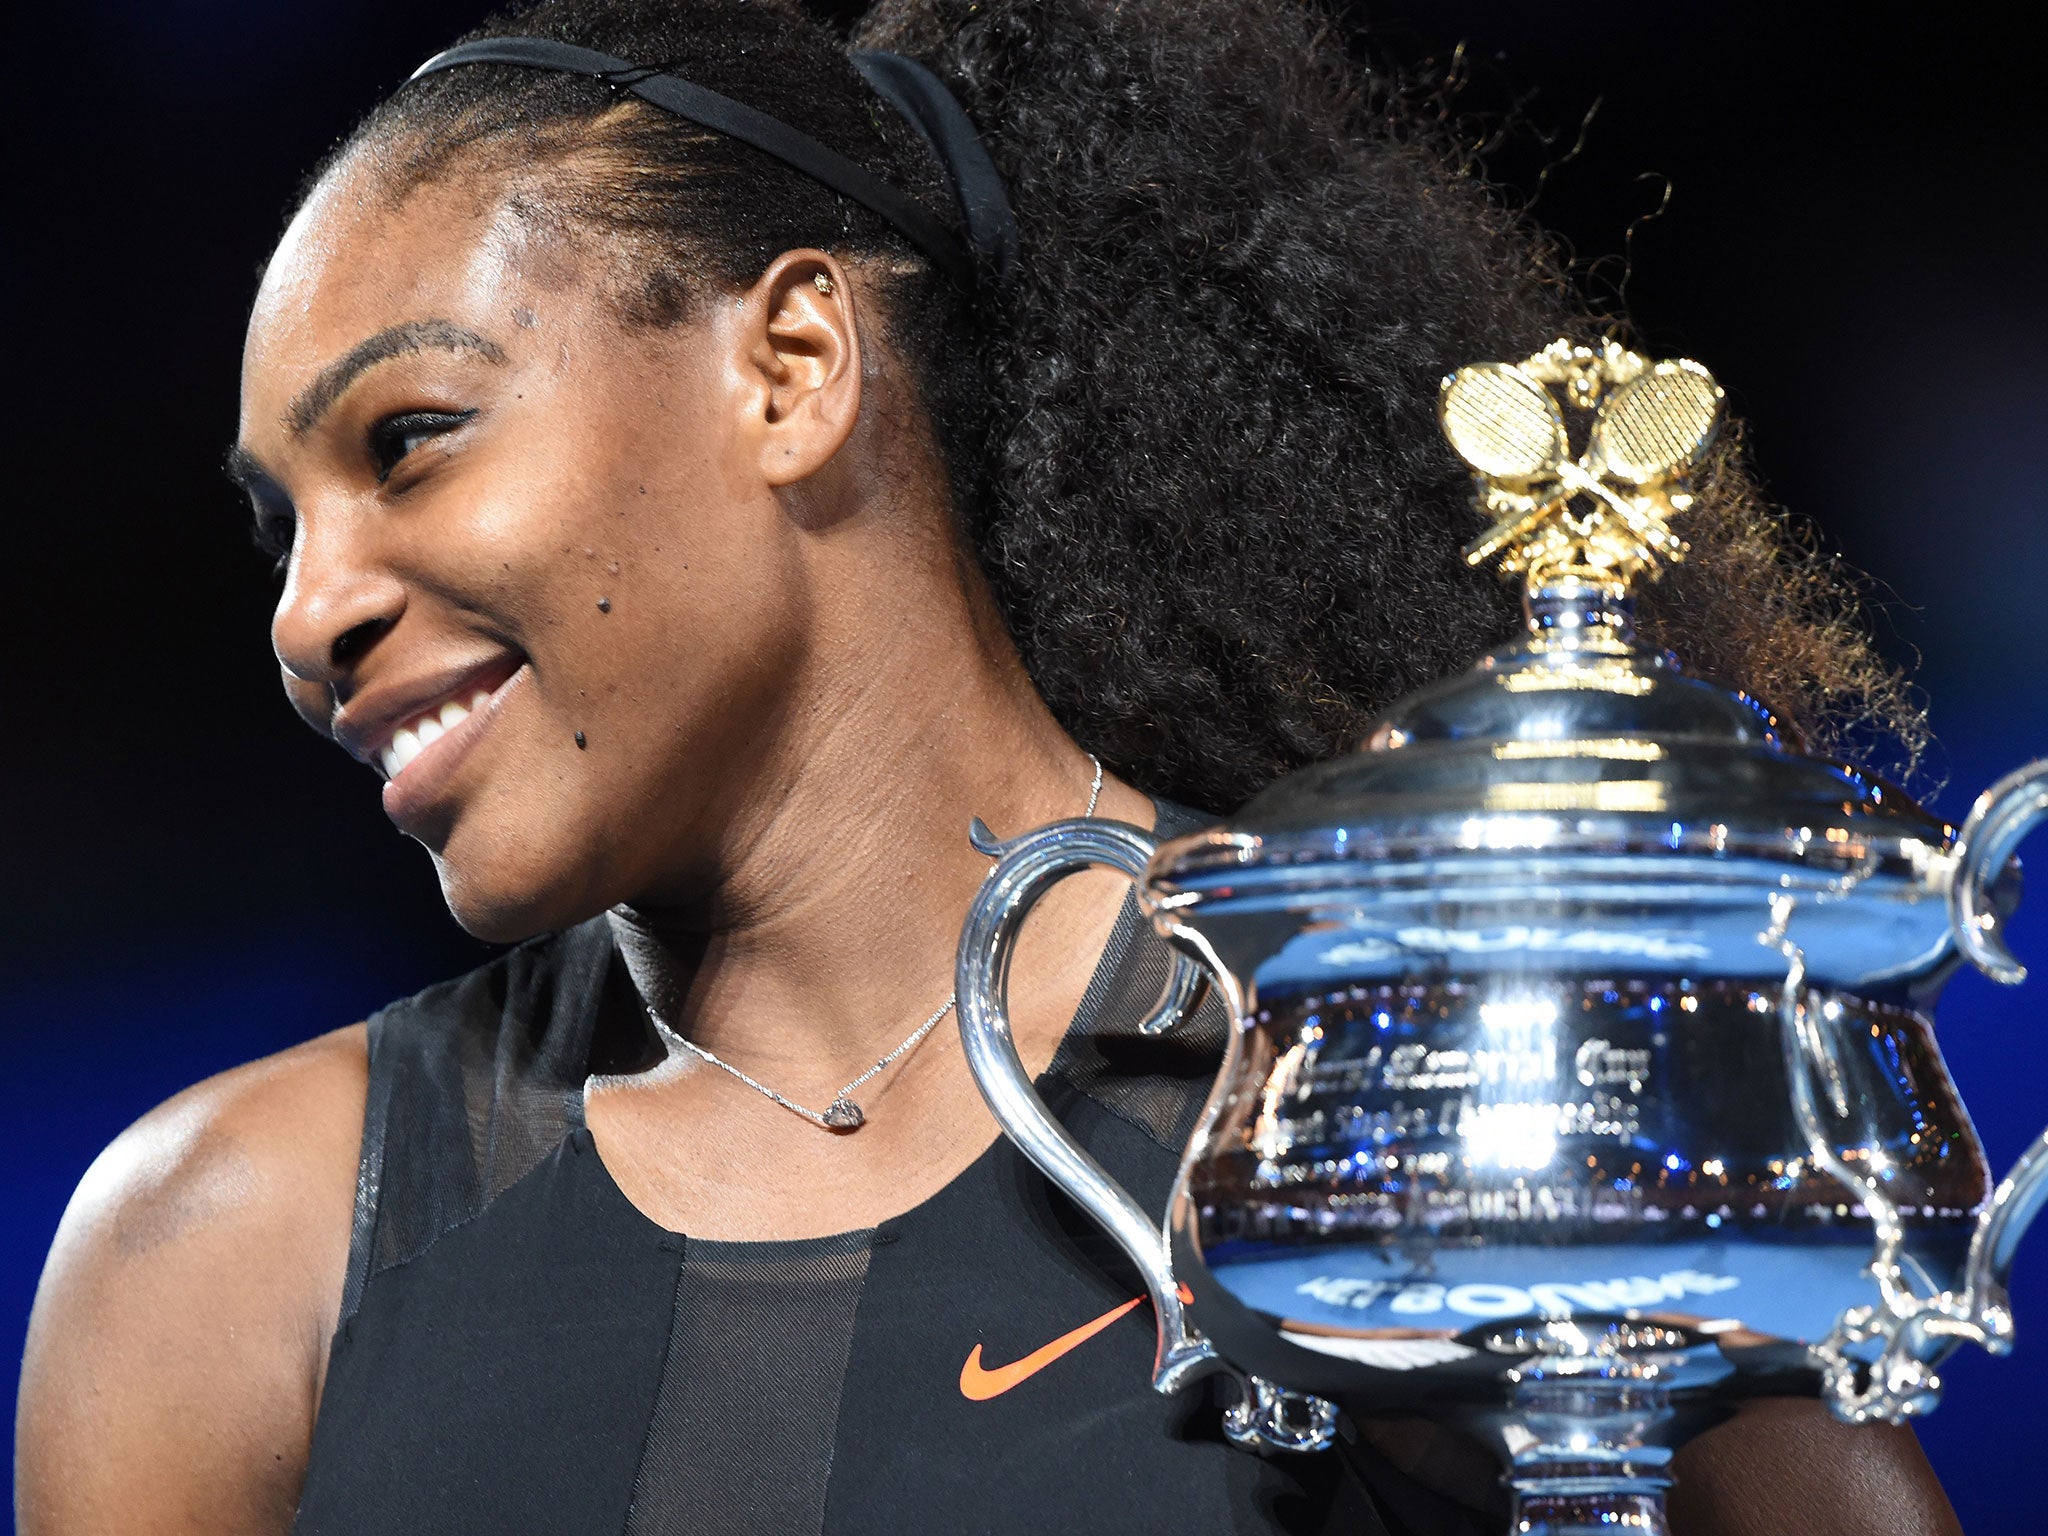 Serena Williams has responded to John McEnroe's comments